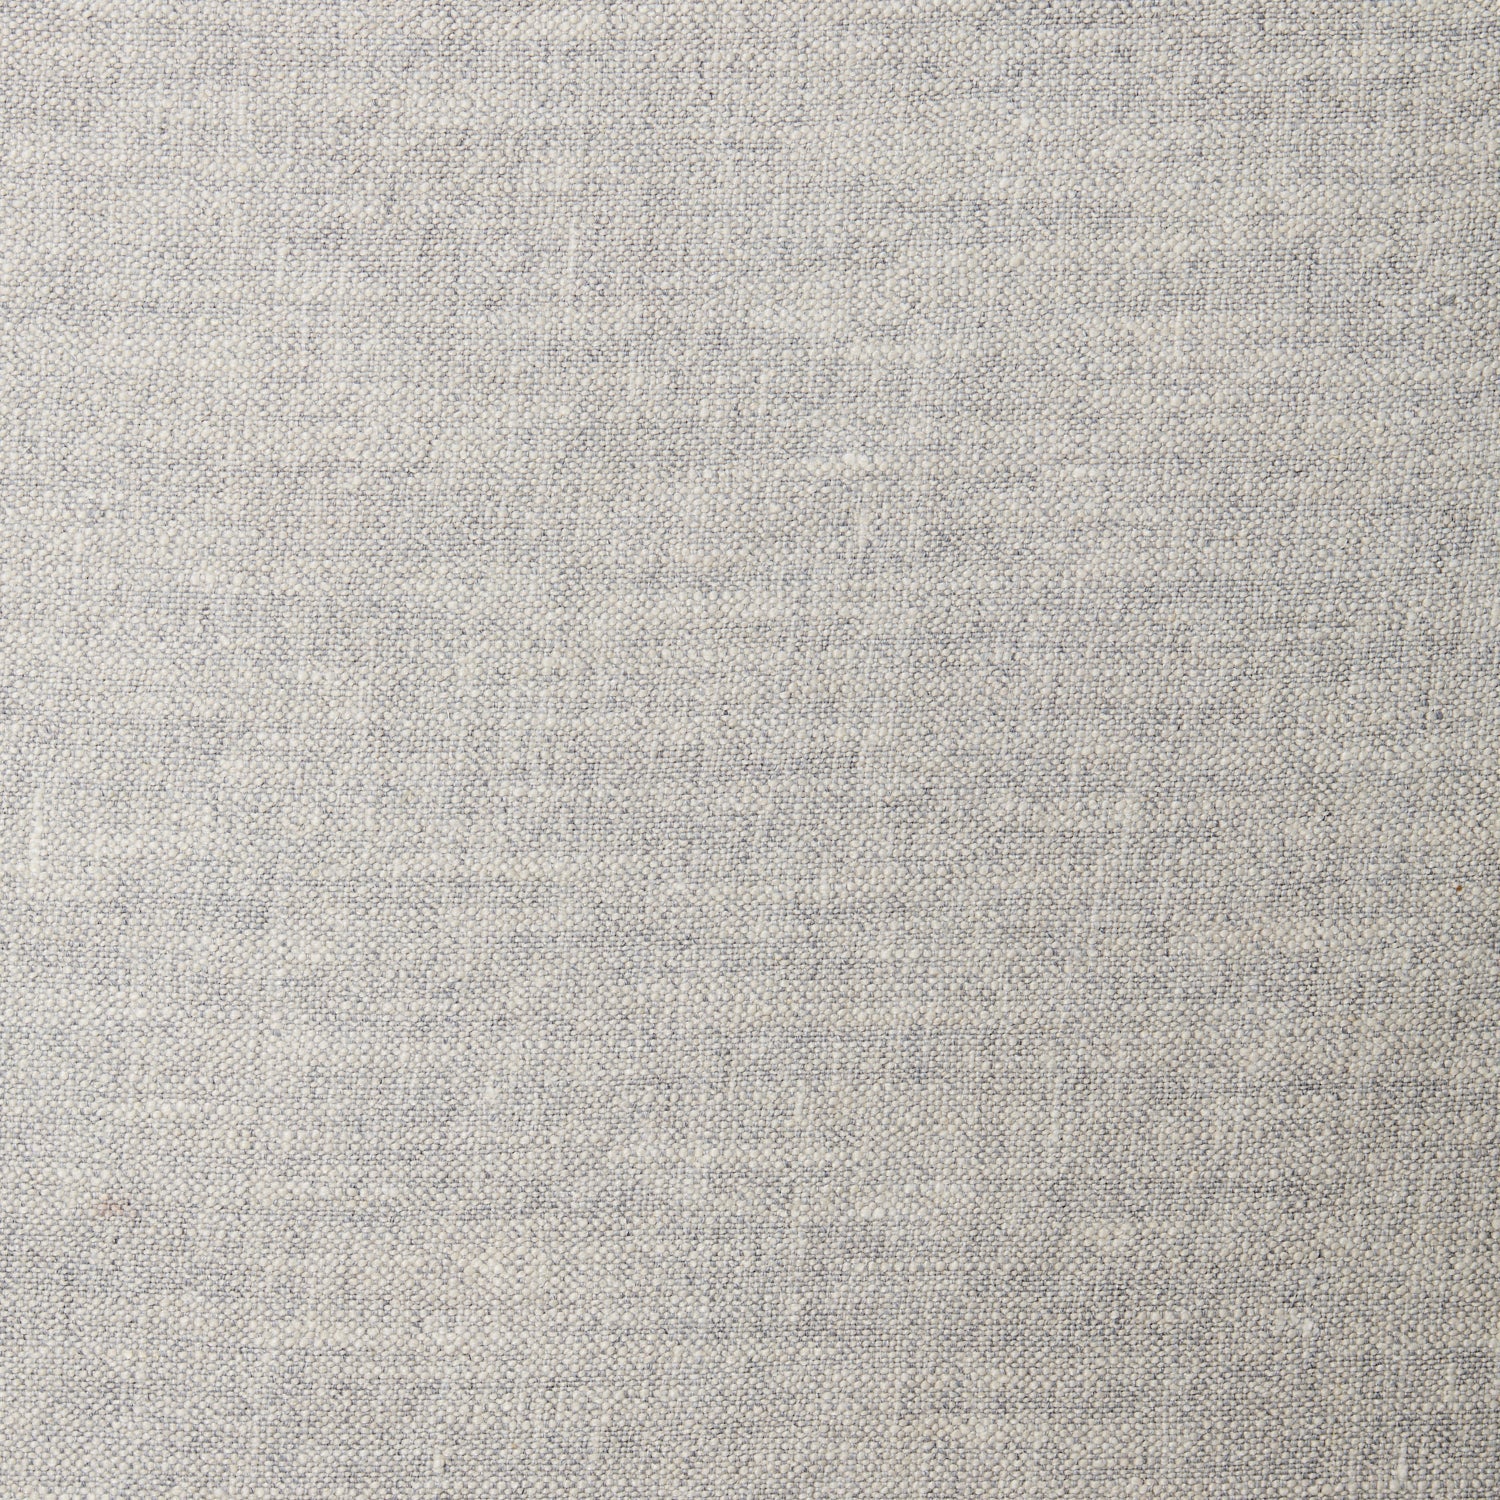 Normandy Fabric shown flat in a soft blue neutral color